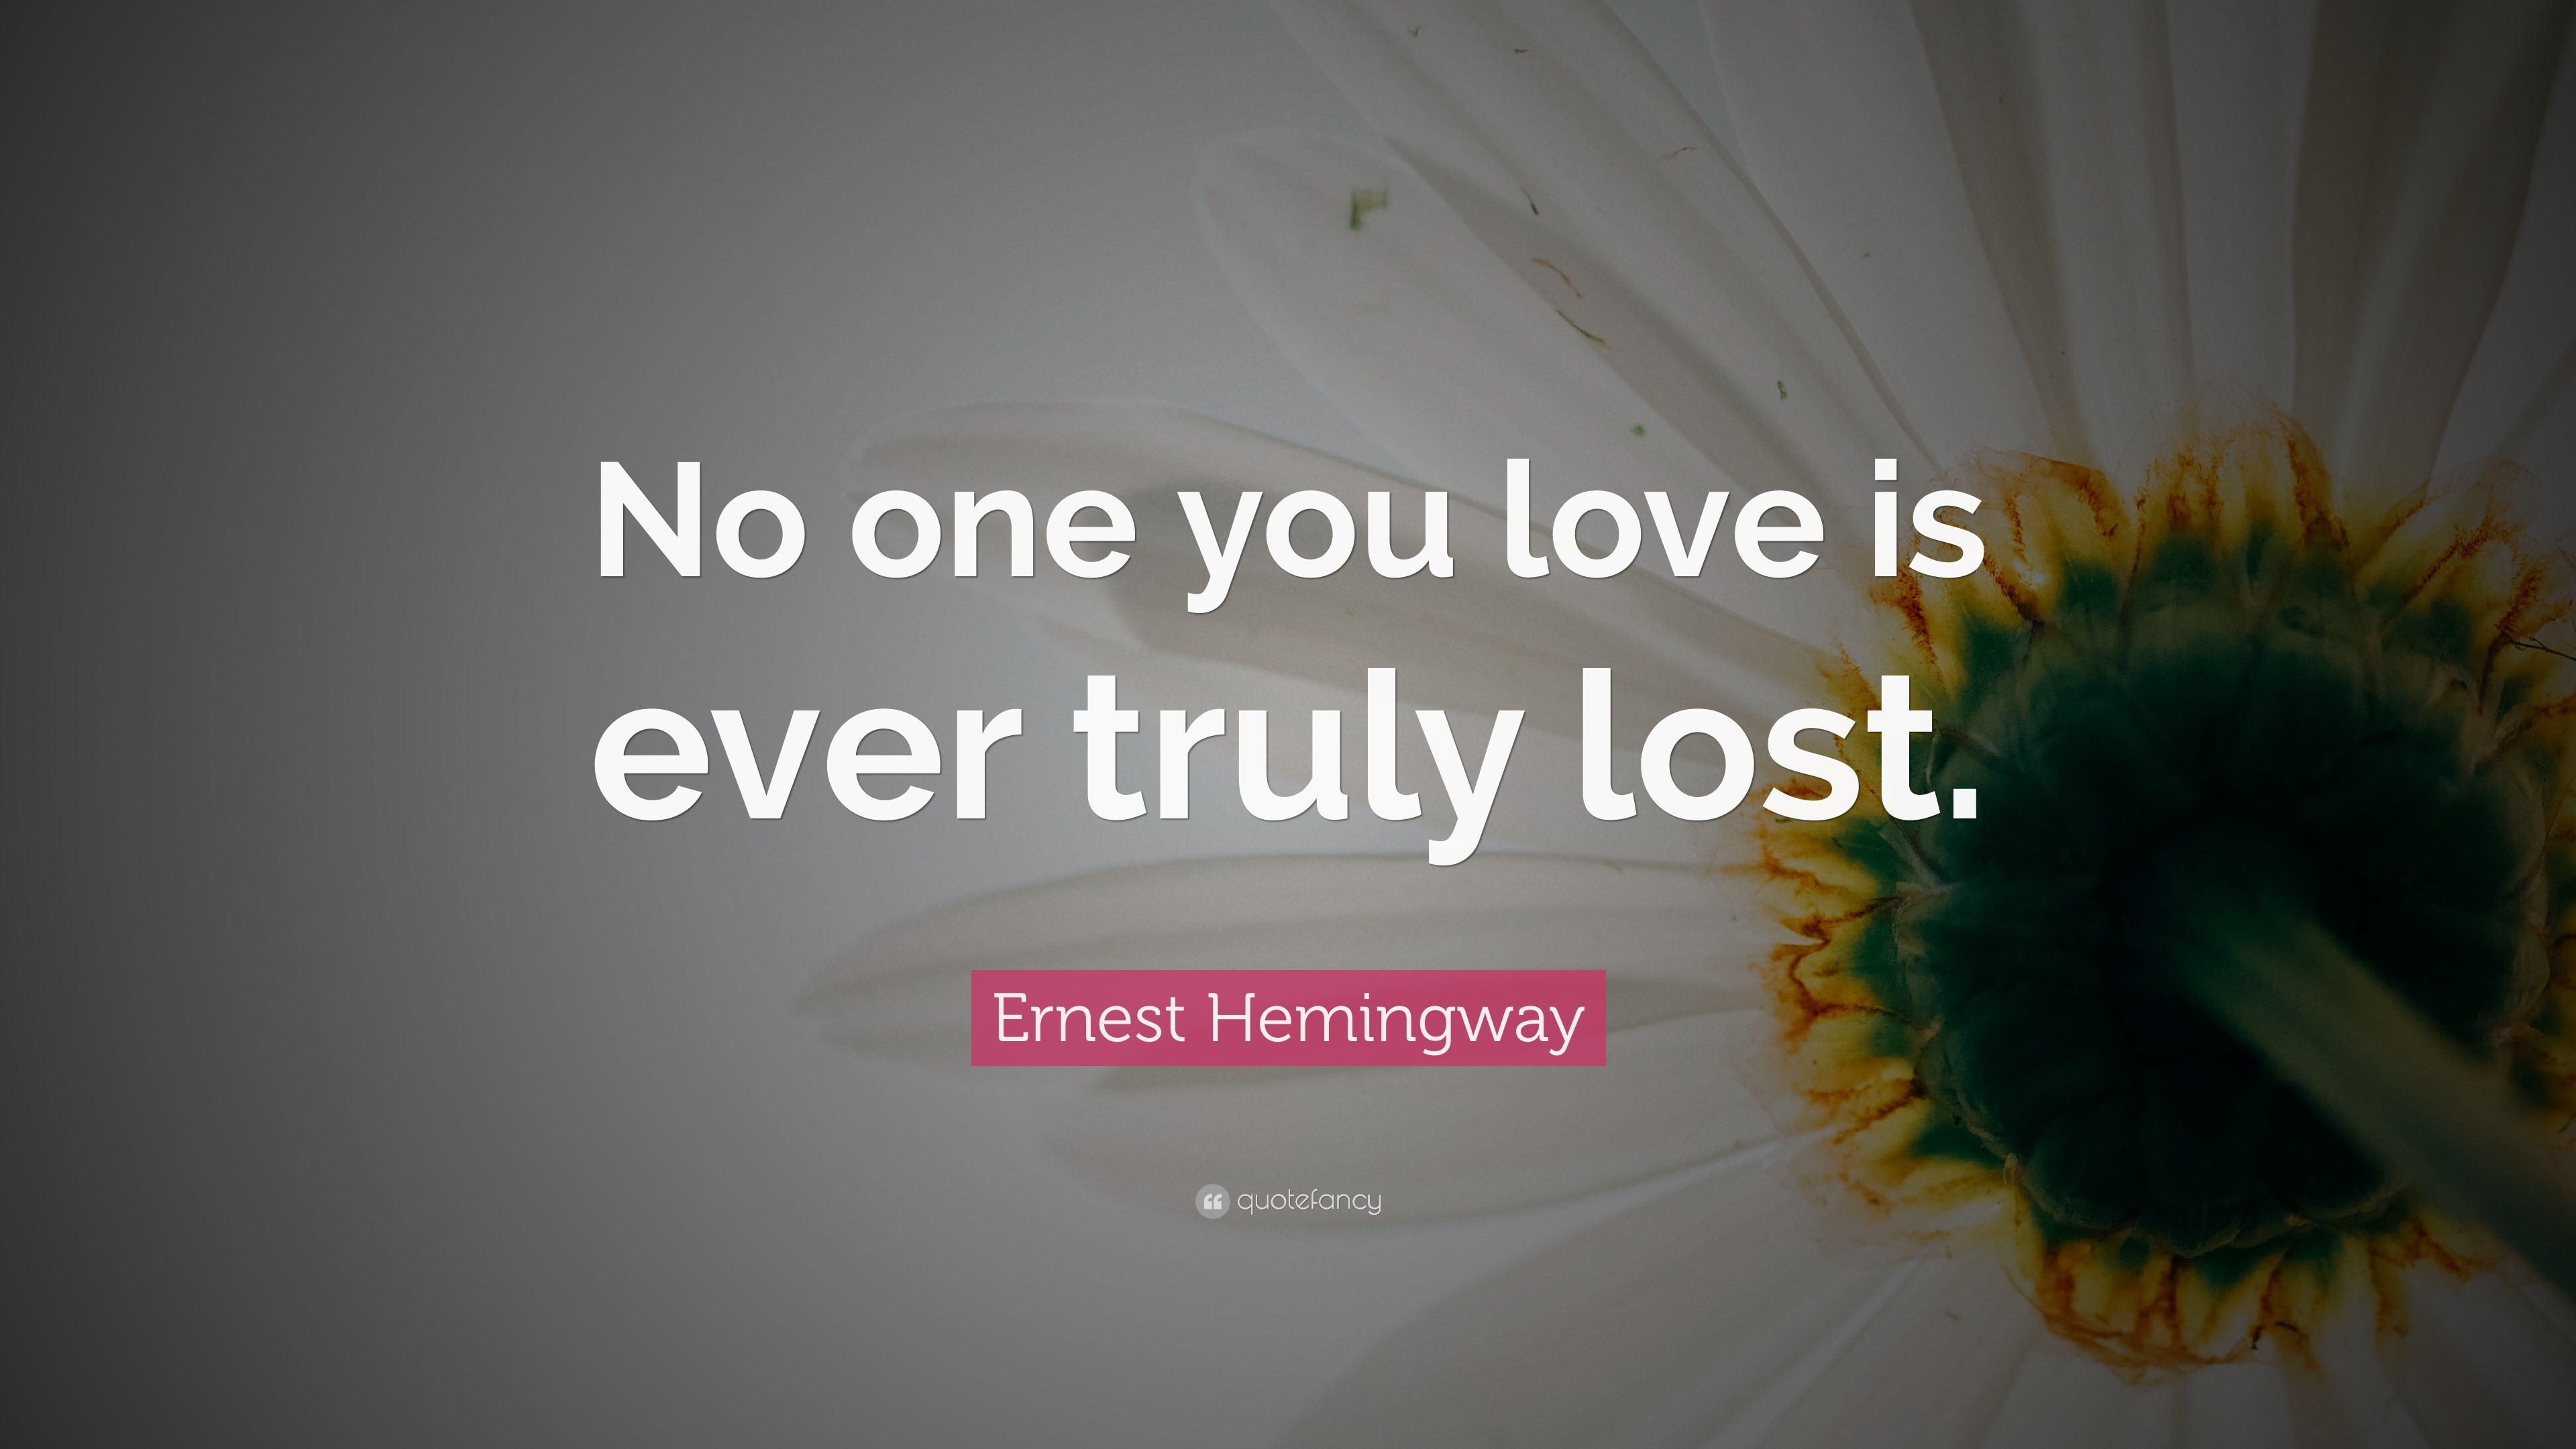 Ernest Hemingway Quote “No one you love is ever truly lost ”